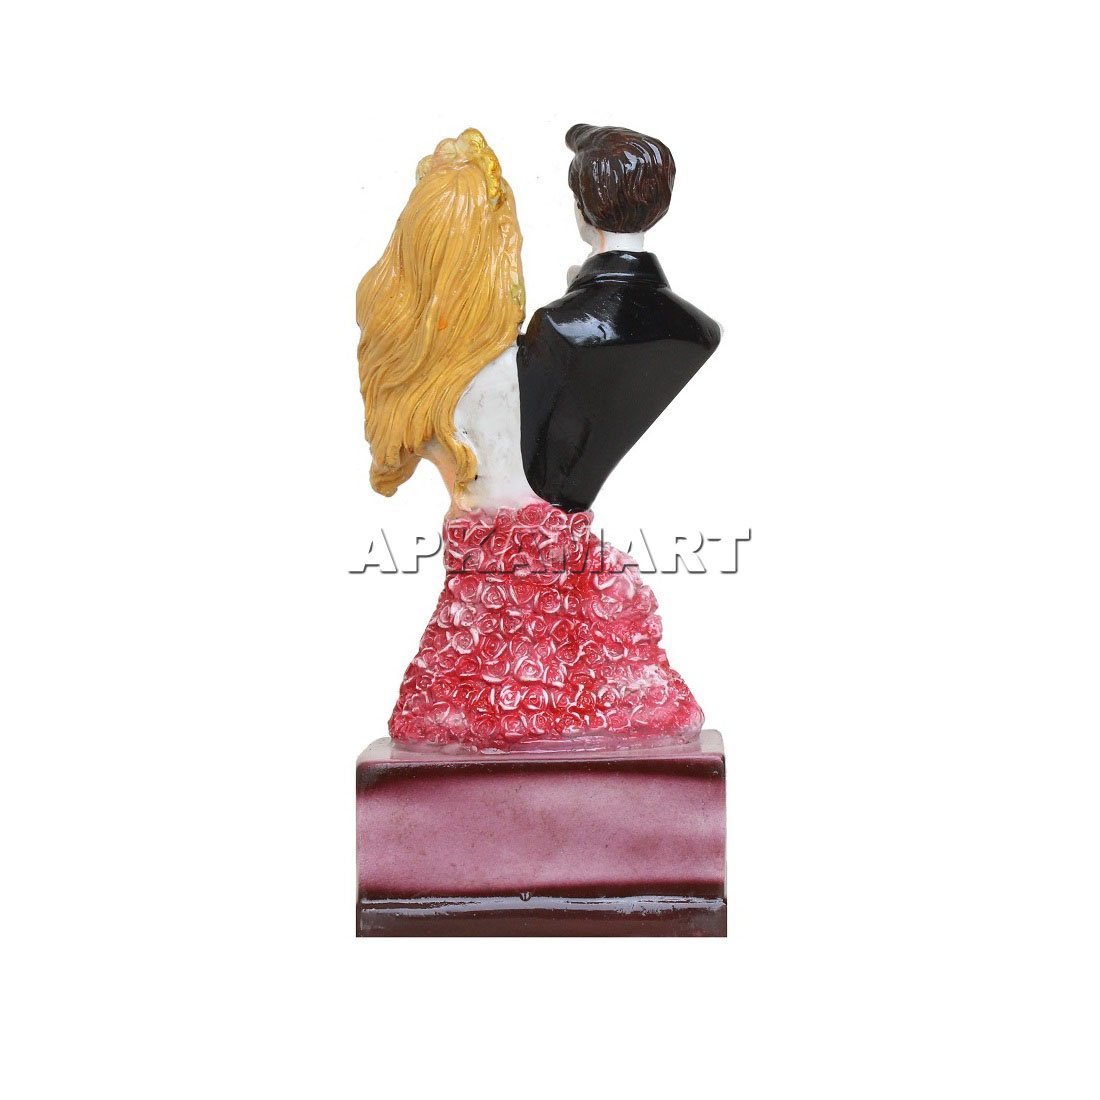 Buy Unique Palette Love Couple Showpiece/Gift for Lover/Loving Couple  Statue Gift for Wedding Couple/Gift for Wedding Anniversary/Birthday Gifts  for Boyfriend Online at Low Prices in India - Amazon.in